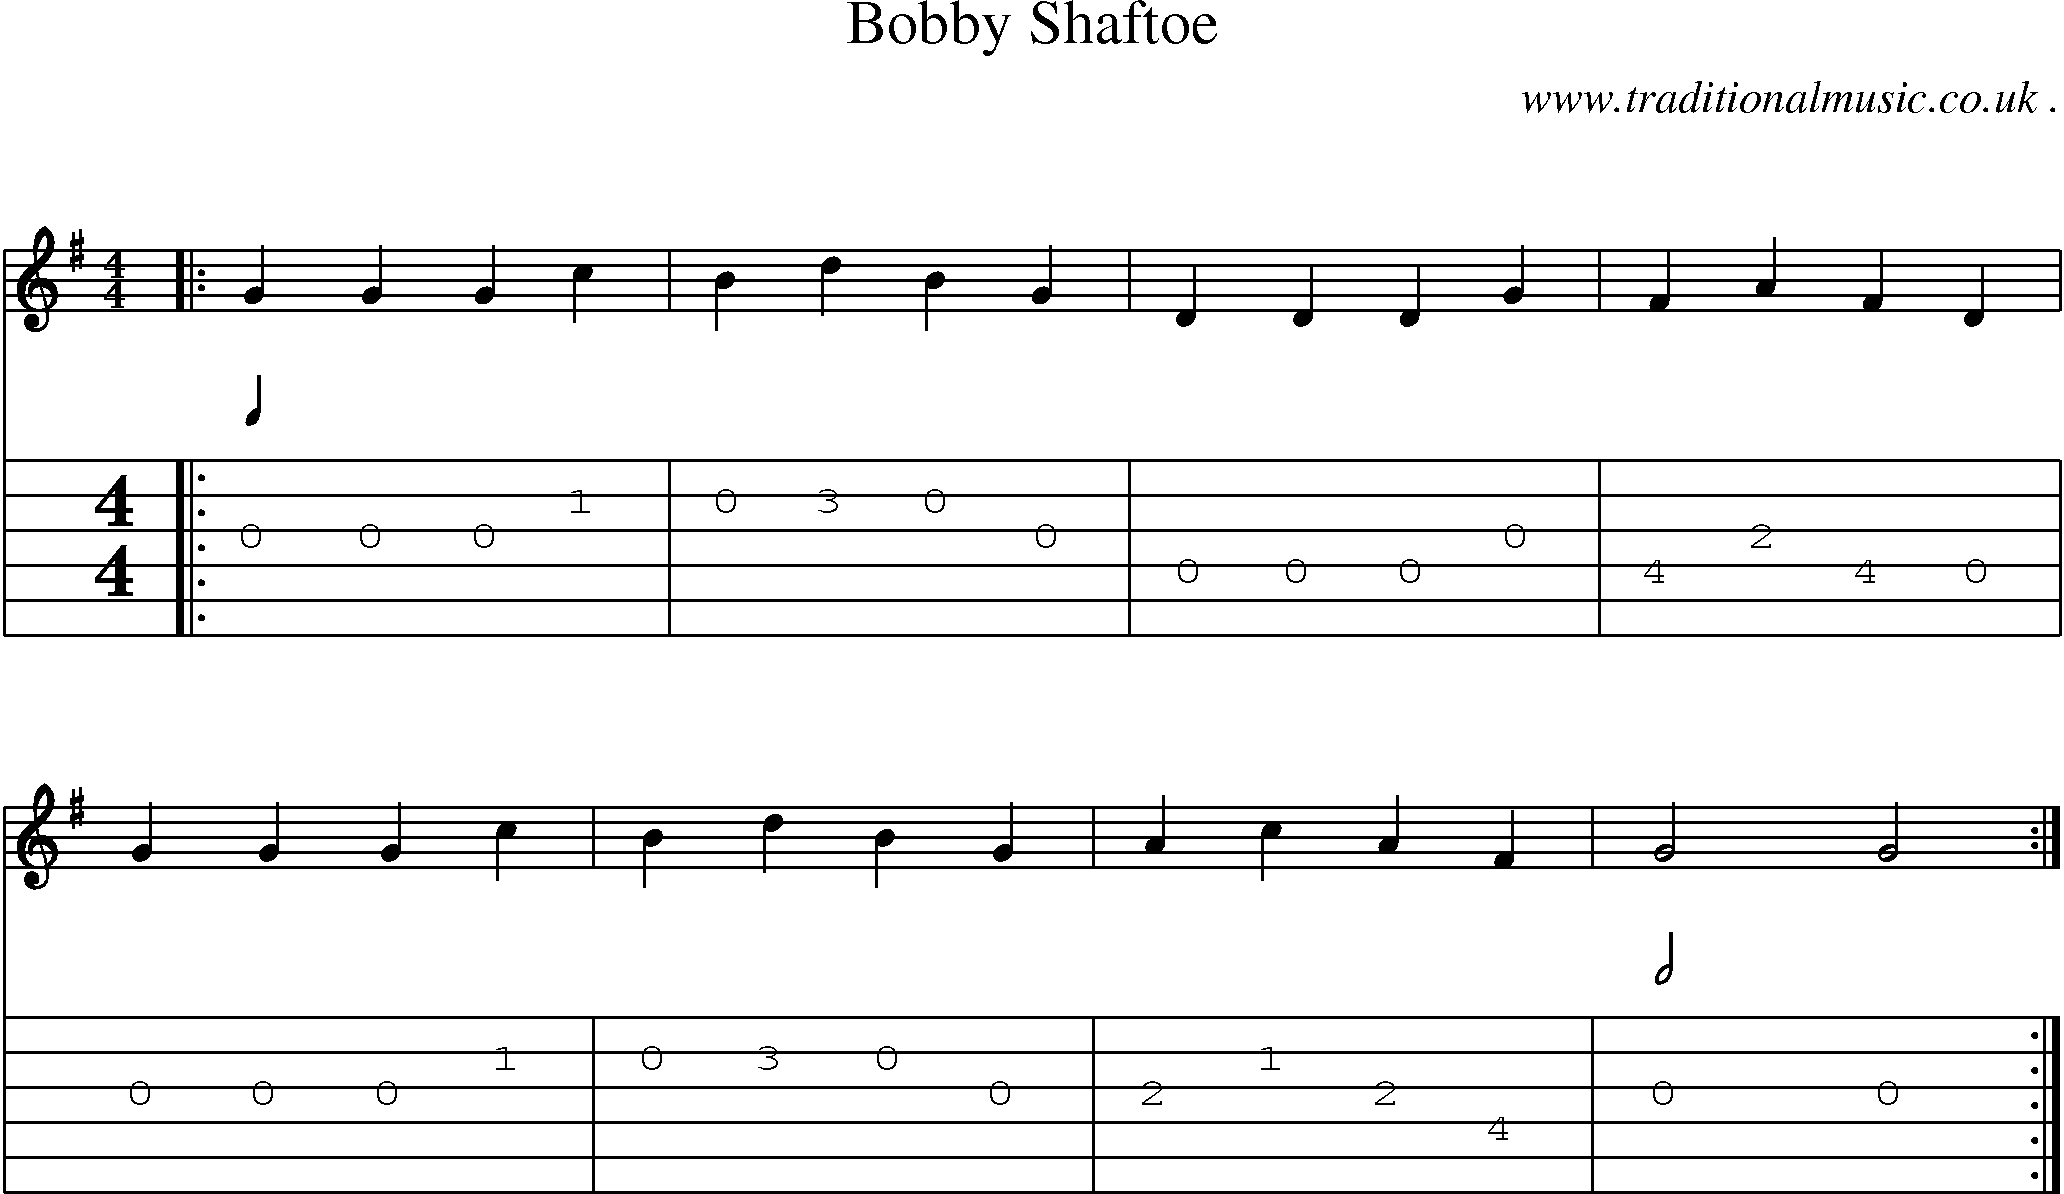 Sheet-Music and Guitar Tabs for Bobby Shaftoe